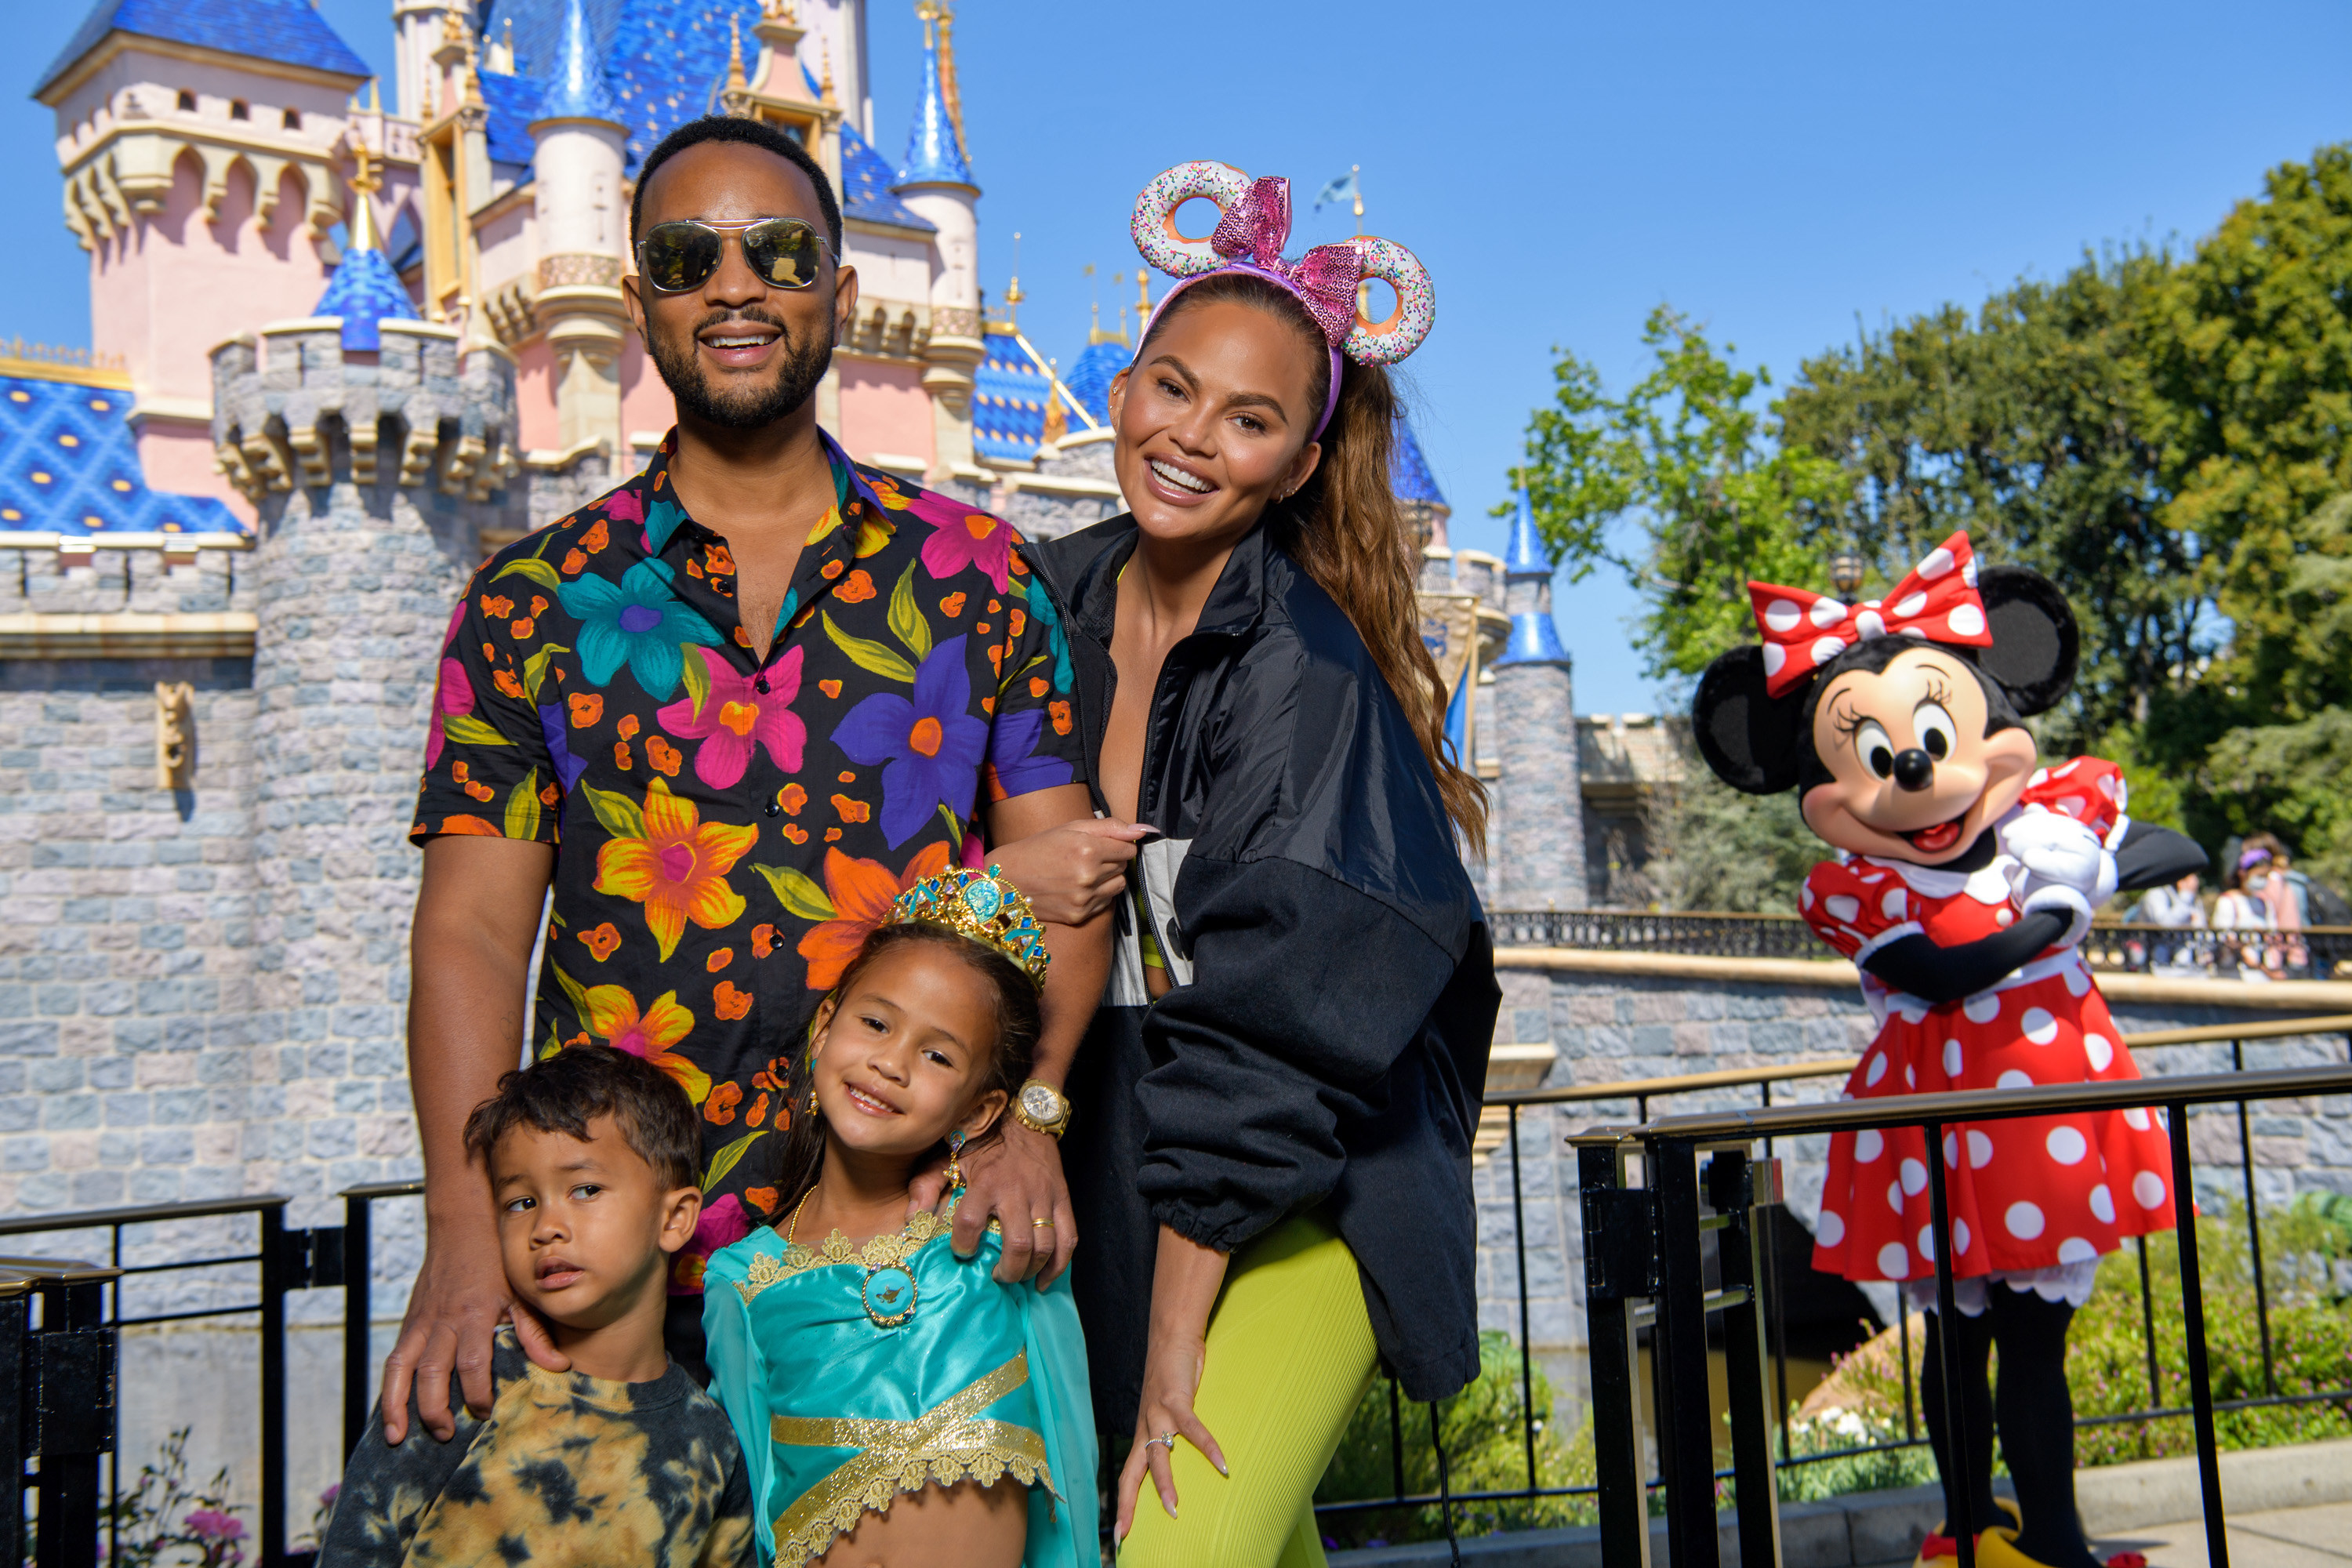 John, Chrissy, Luna, and Miles smile for a family photo at Disneyland with Minnie Mouse in the background